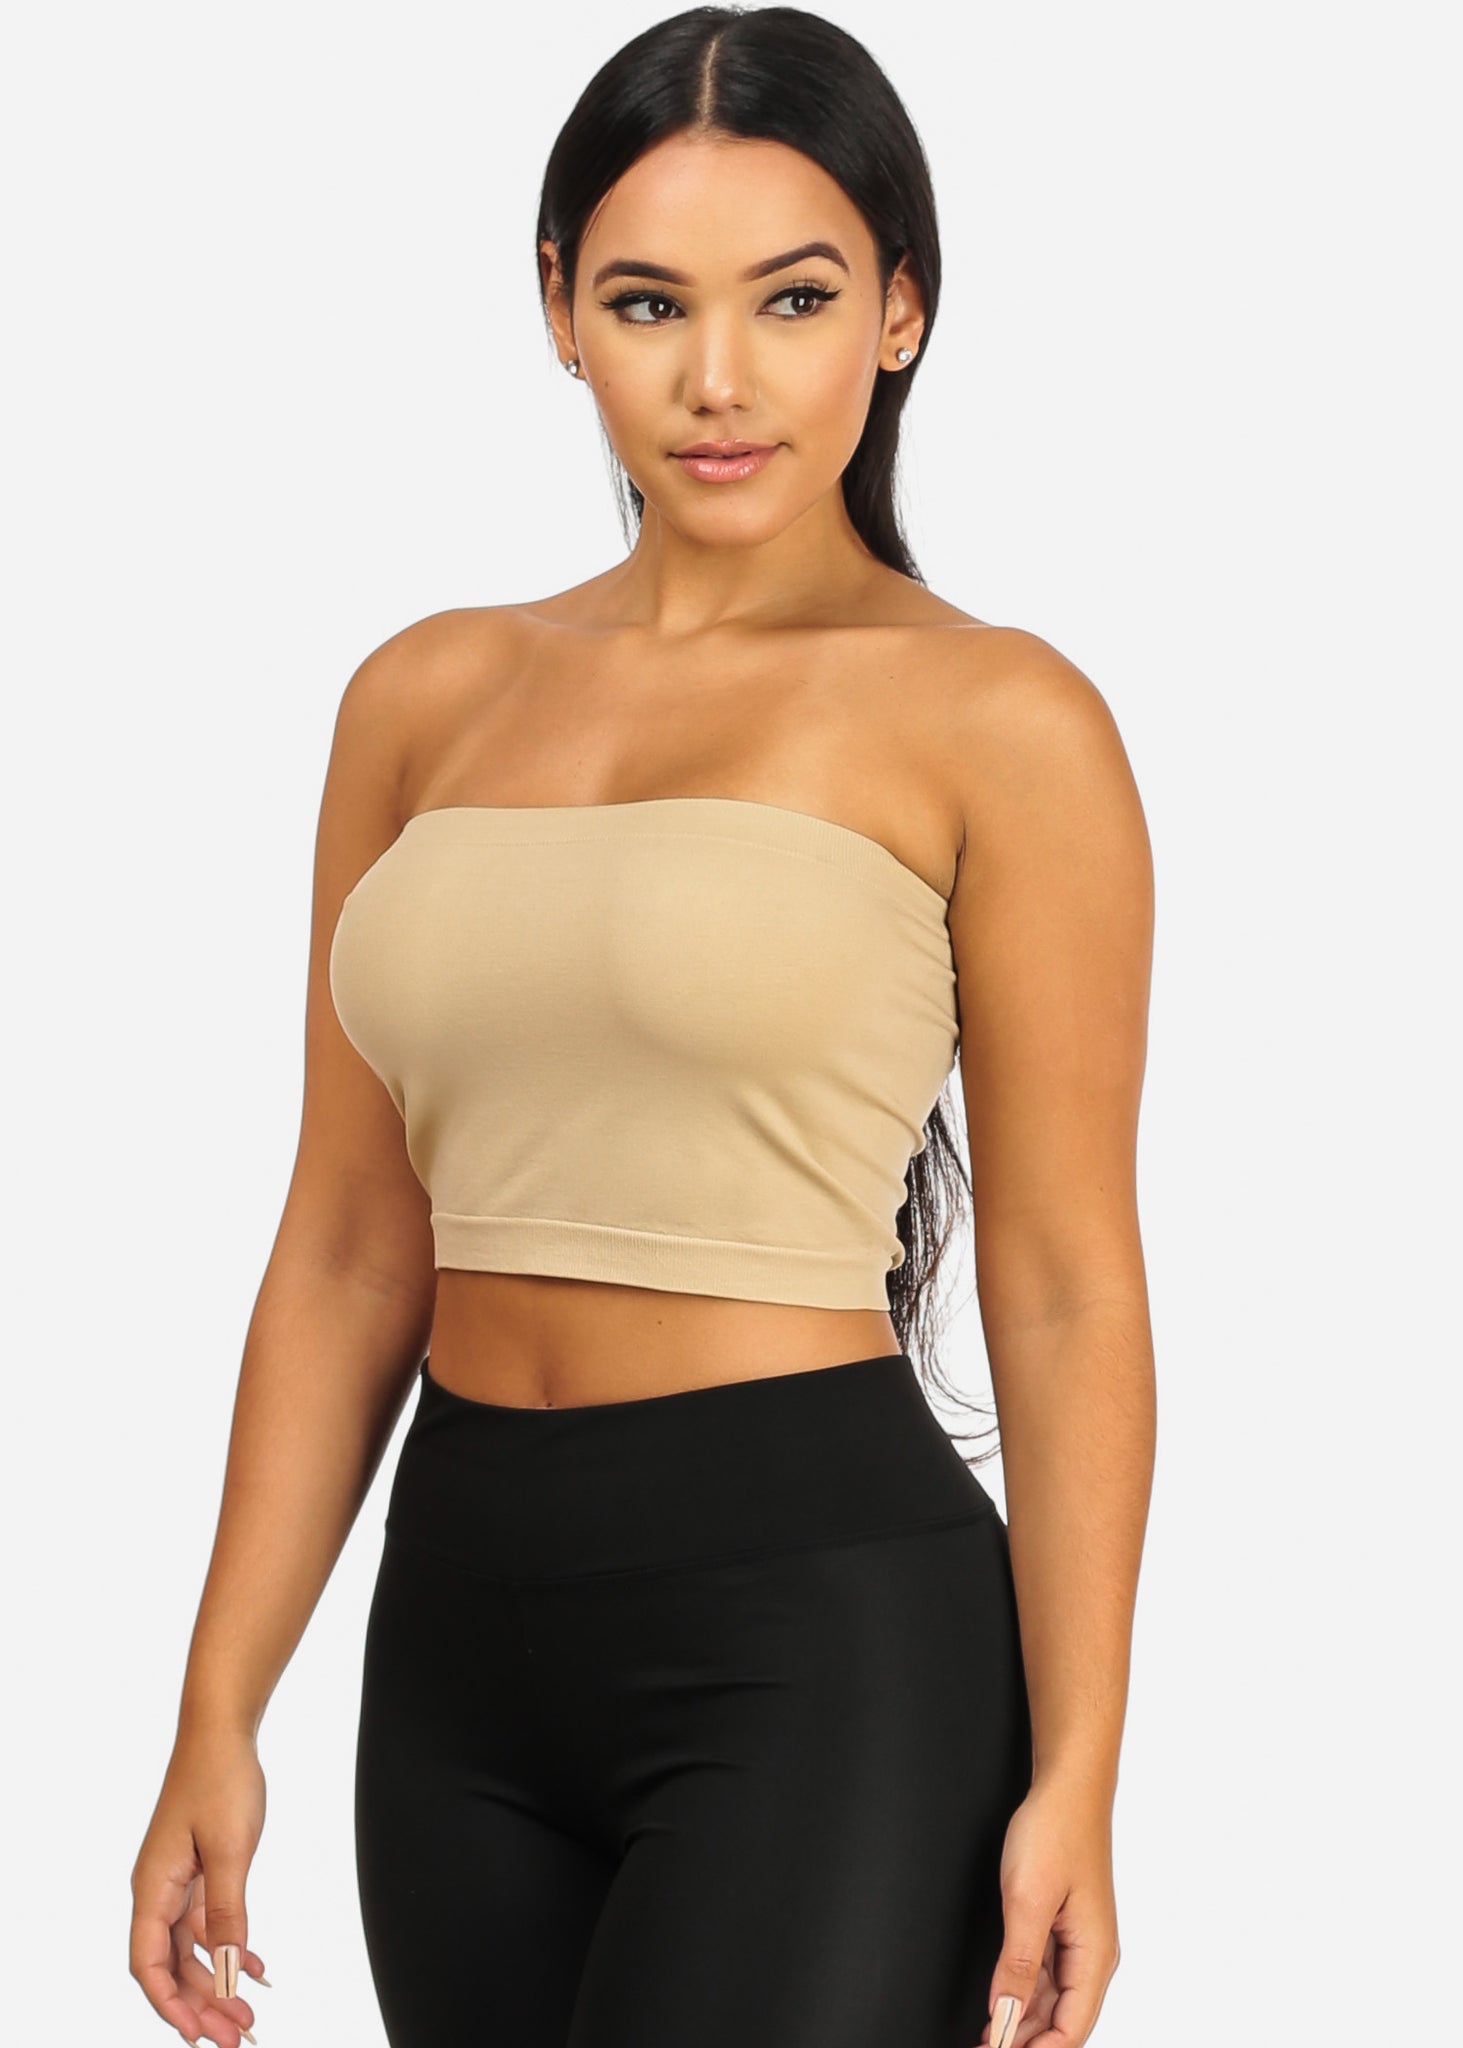 Strapless Women's Tan Tube Top One Size BRA-1115 – One Size Fits